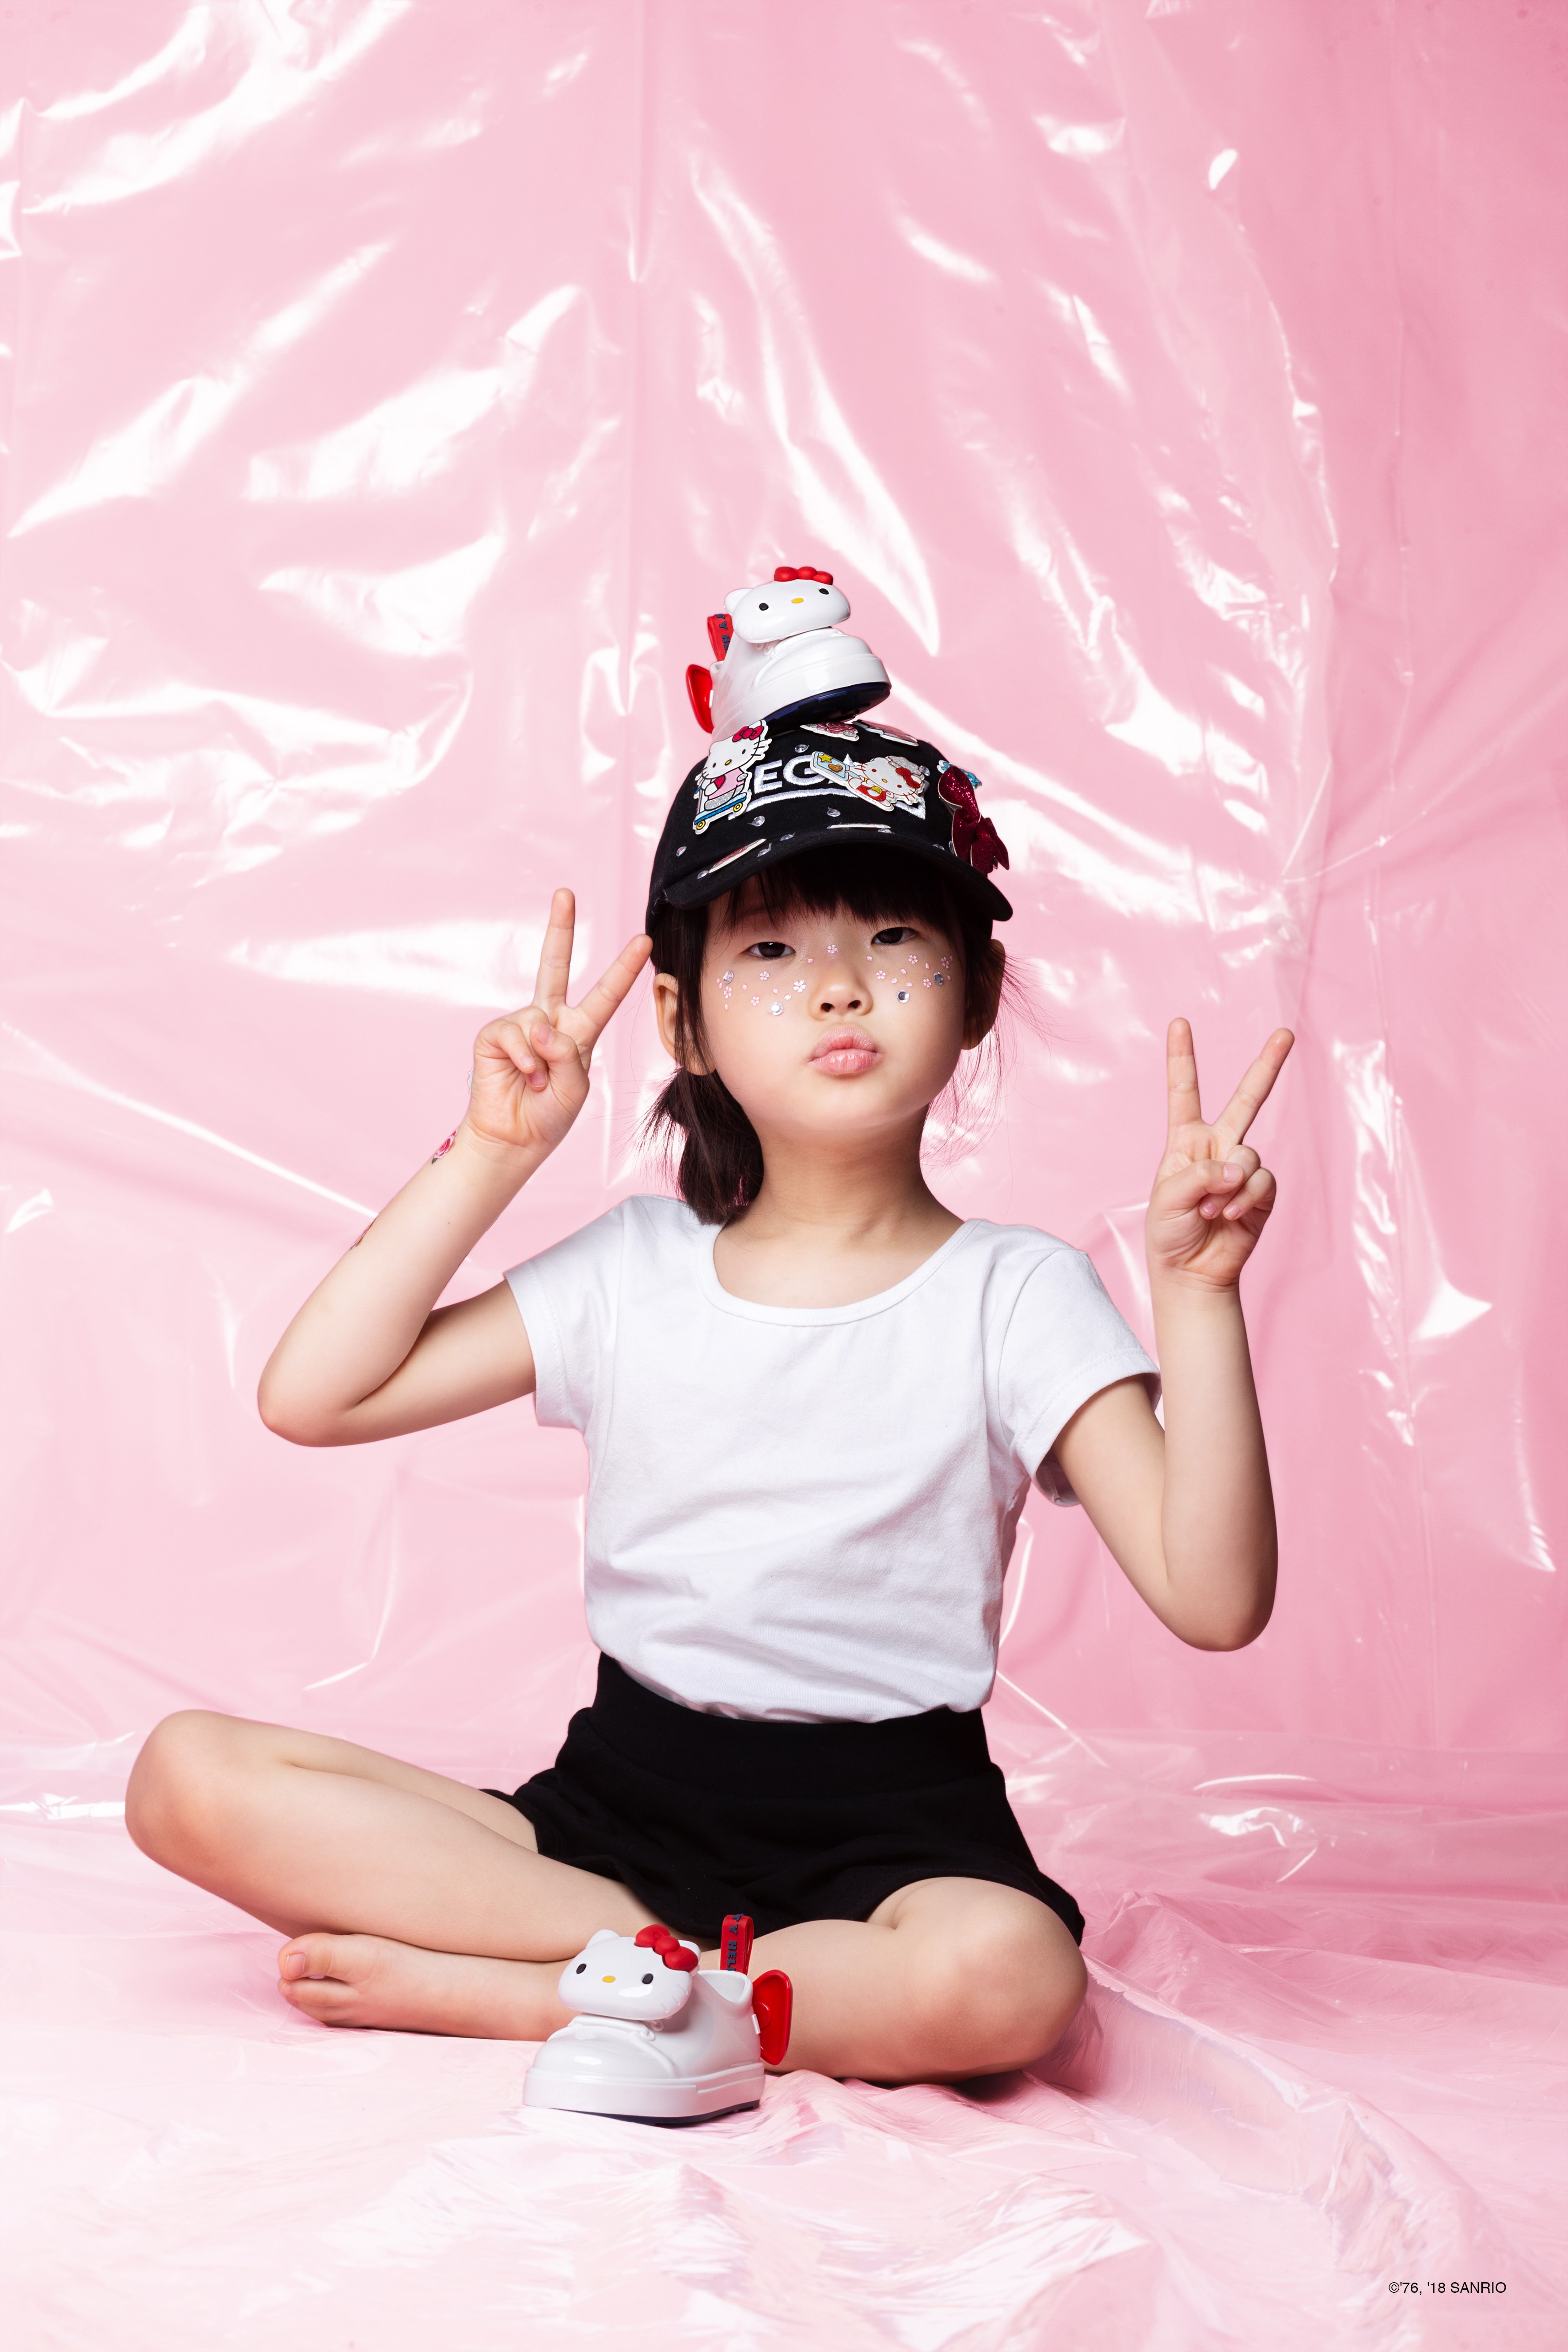 Melissa Launches Hello Kitty-themed Collection Rubber Sneaker Sandals Bow Pink Kids Shoes Lookbook 